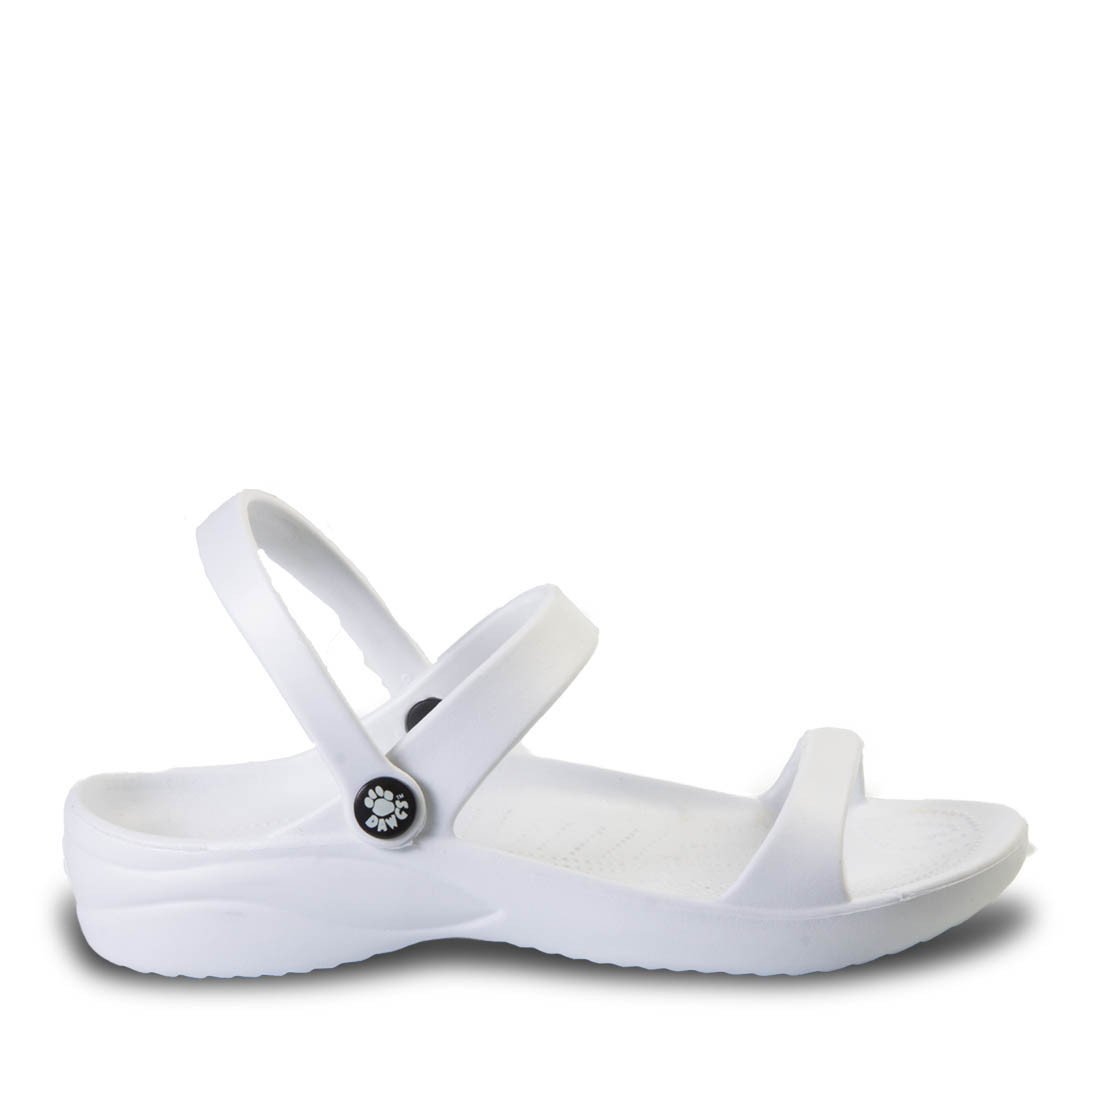 Image of Women's 3-Strap Sandals - White